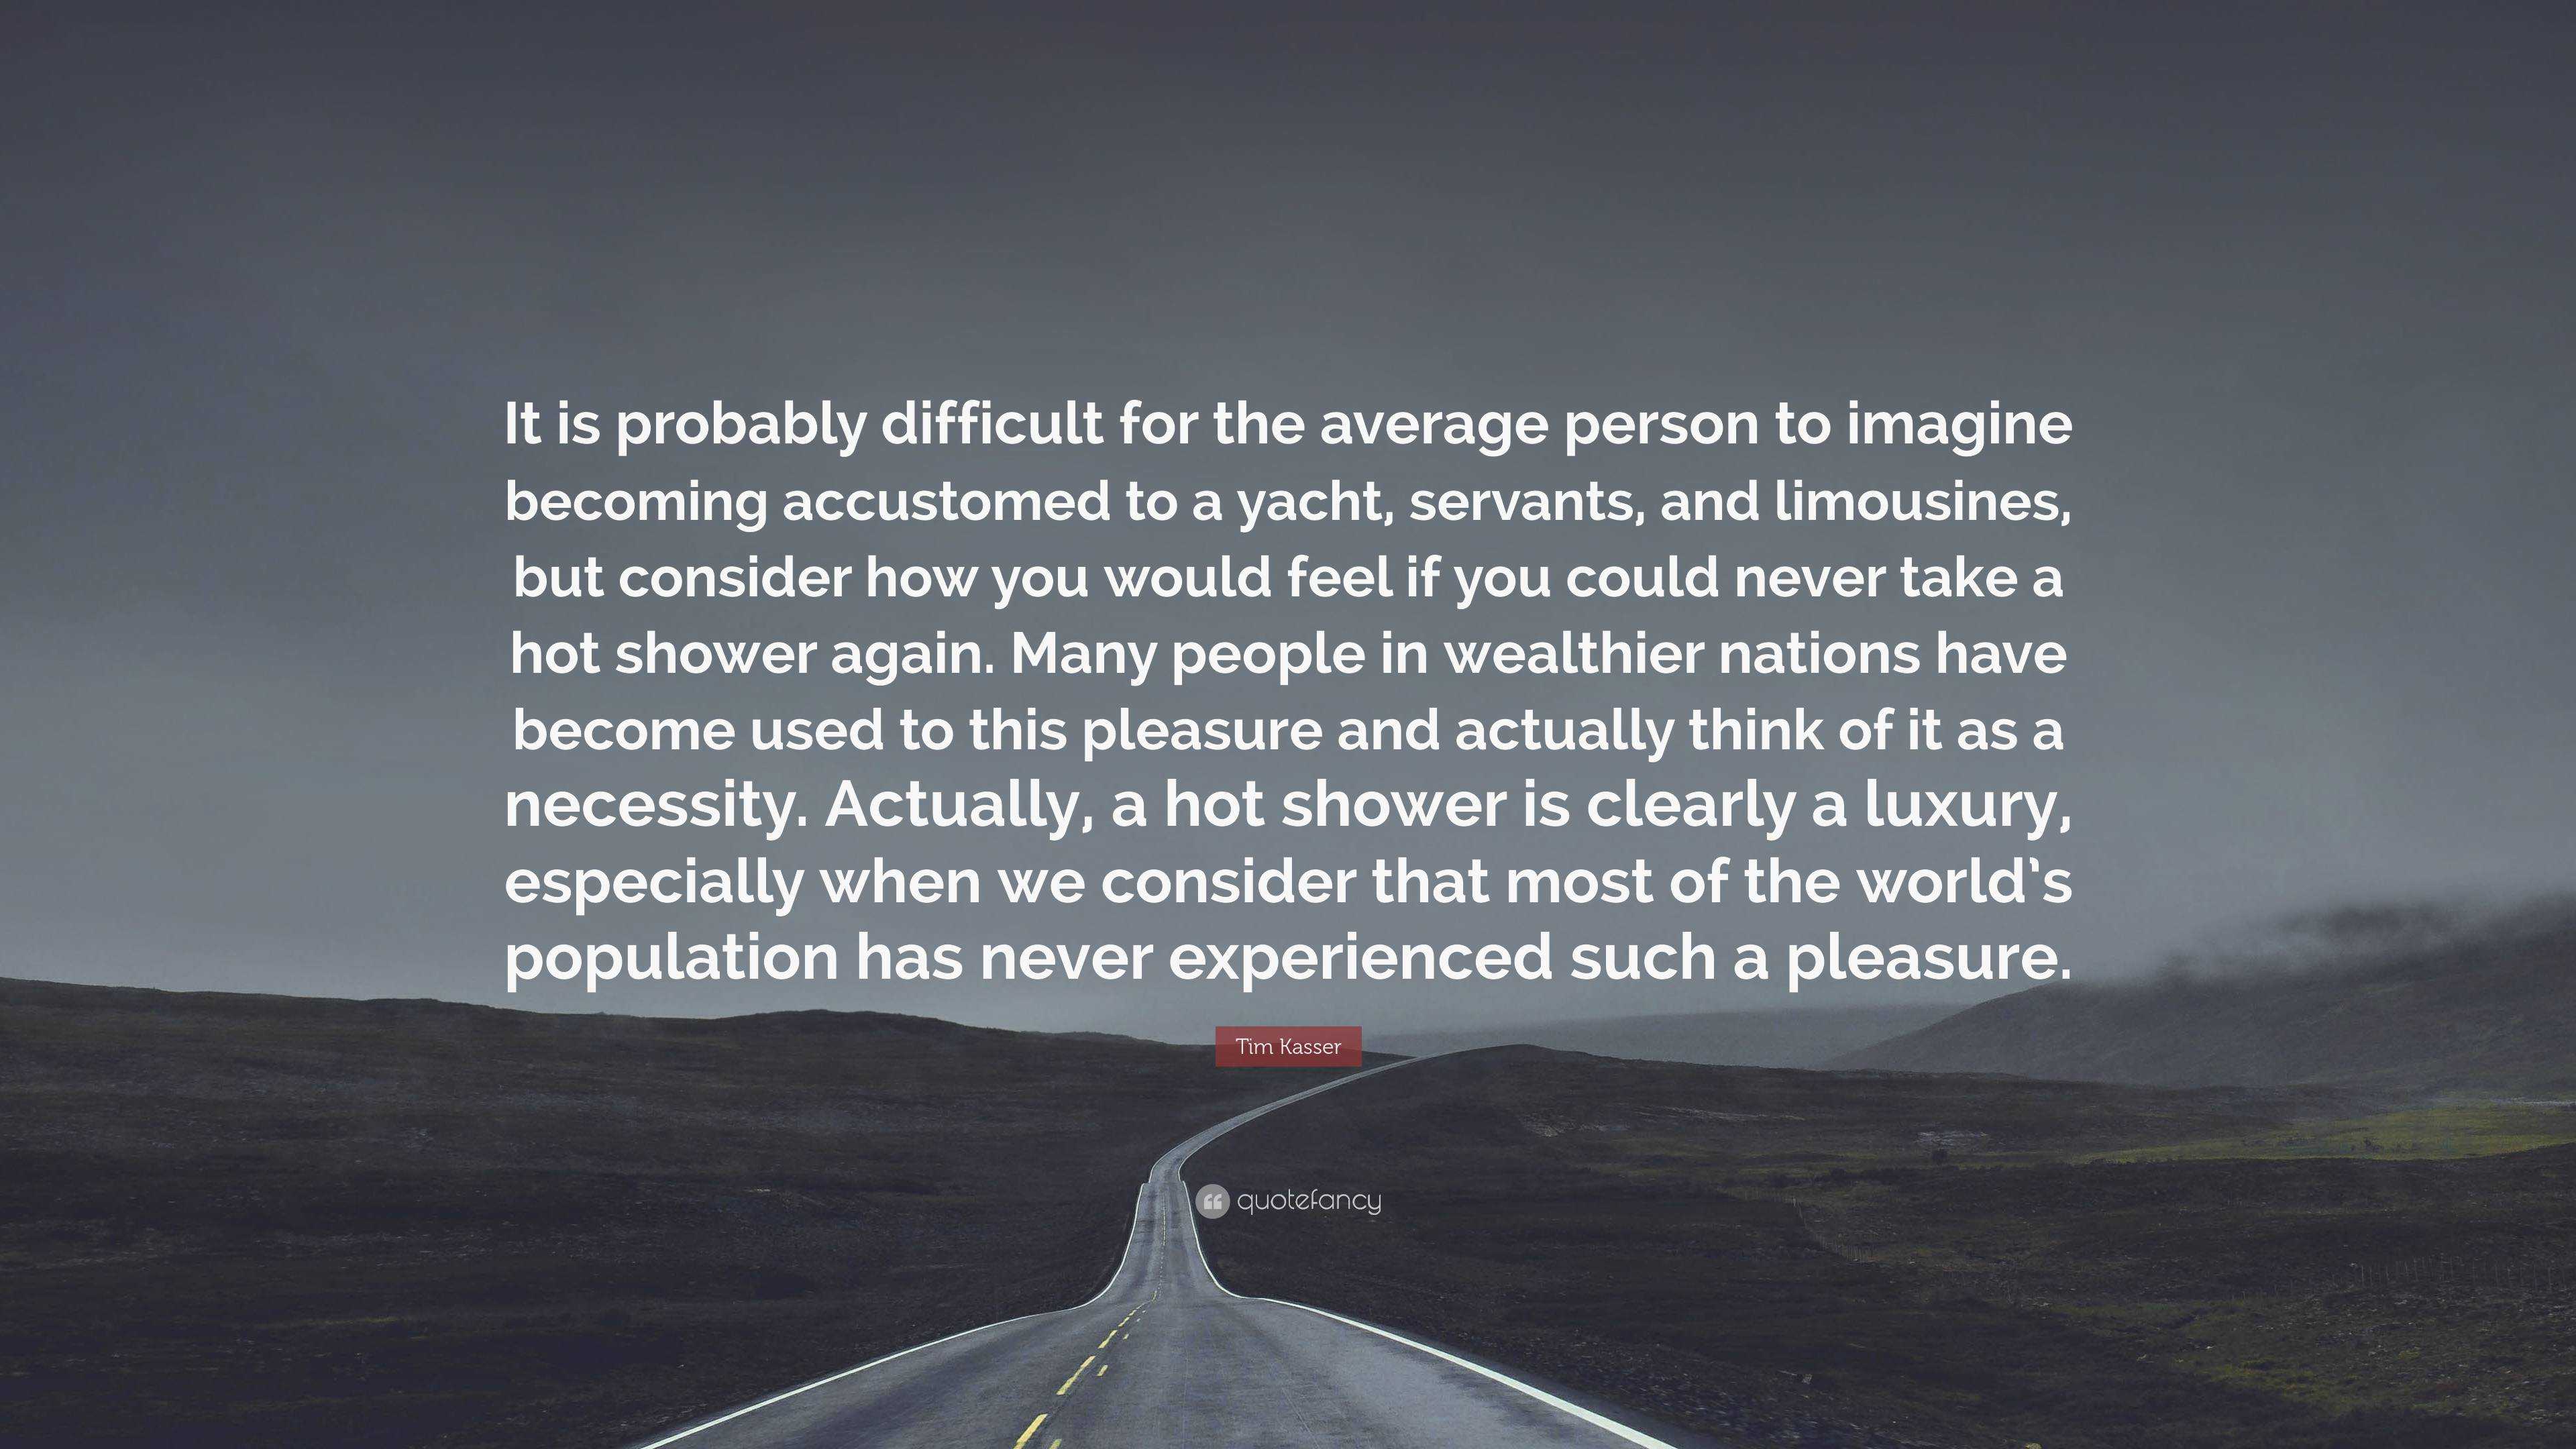 Kasser Quote: “It is probably for the average person to imagine becoming accustomed to yacht, servants, and but...”